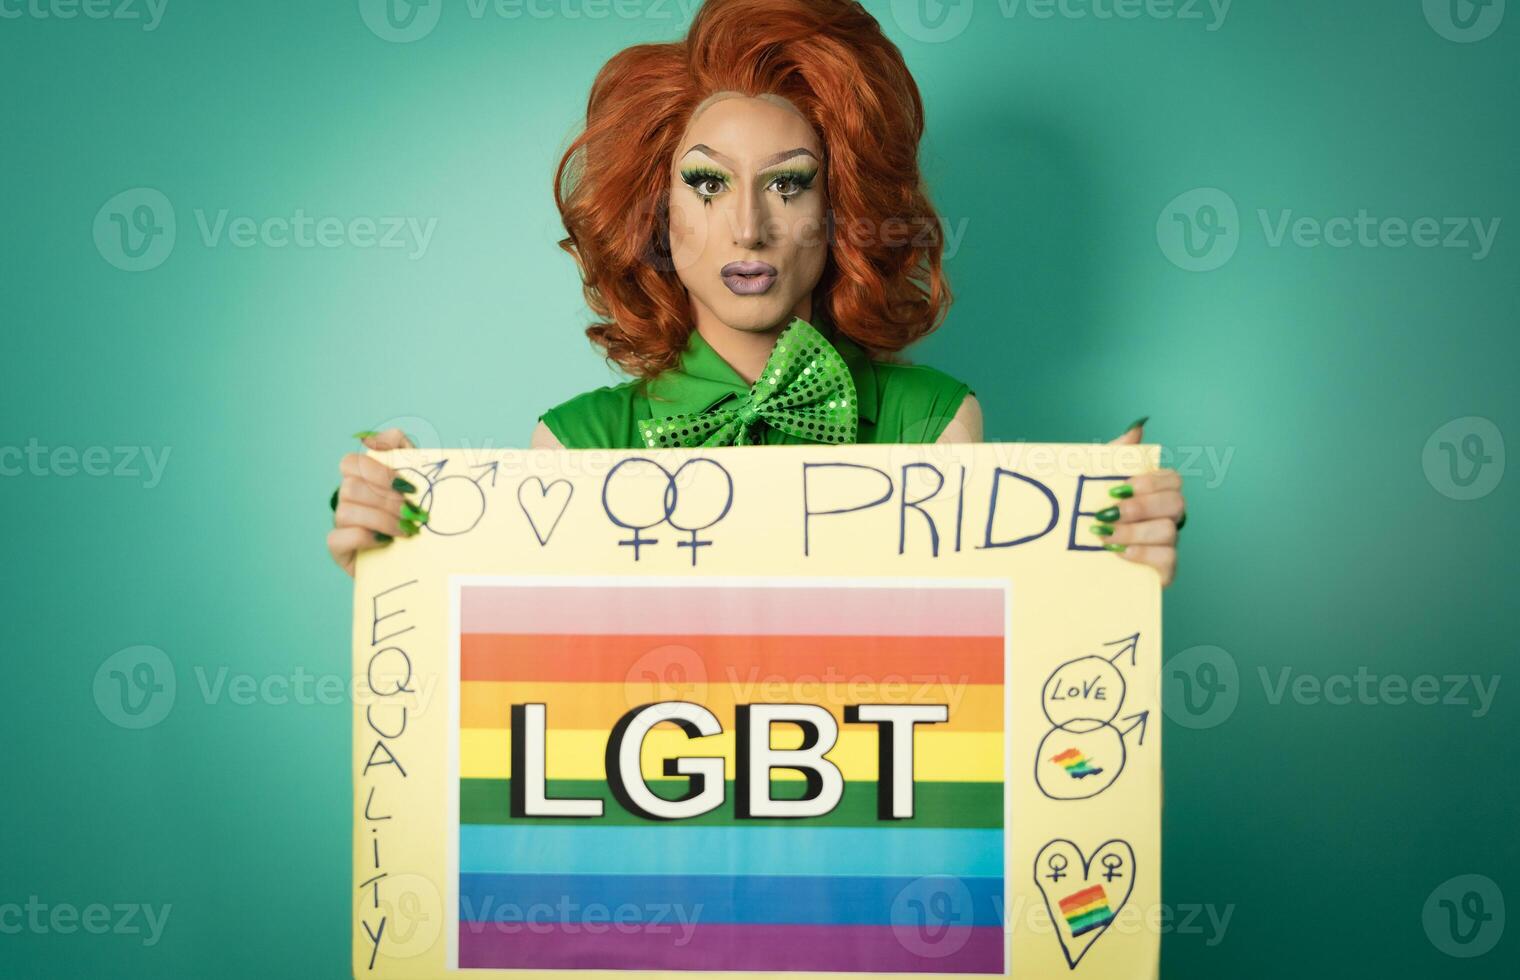 Drag queen celebrating gay pride holding banner with rainbow flag - LGBTQ social community concept photo